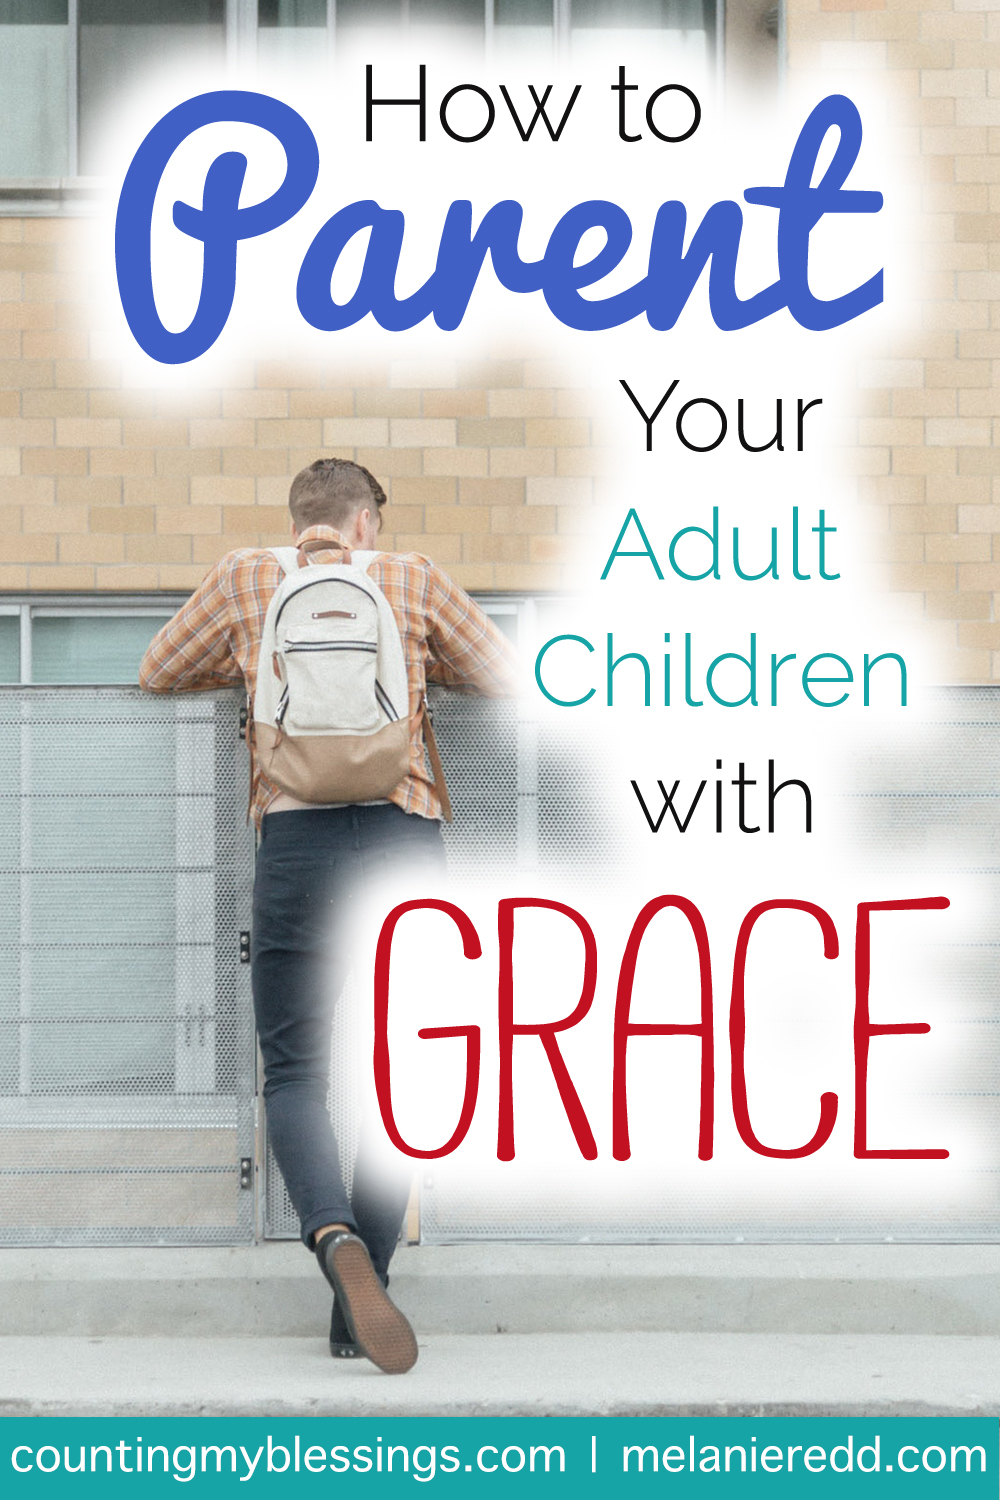 Parenting our kids when they get to be adults can be a challenge. Transitions are necessary. Here are Tips for Parenting Adult Children with Grace. #parentingadults #adultchildren #parenting